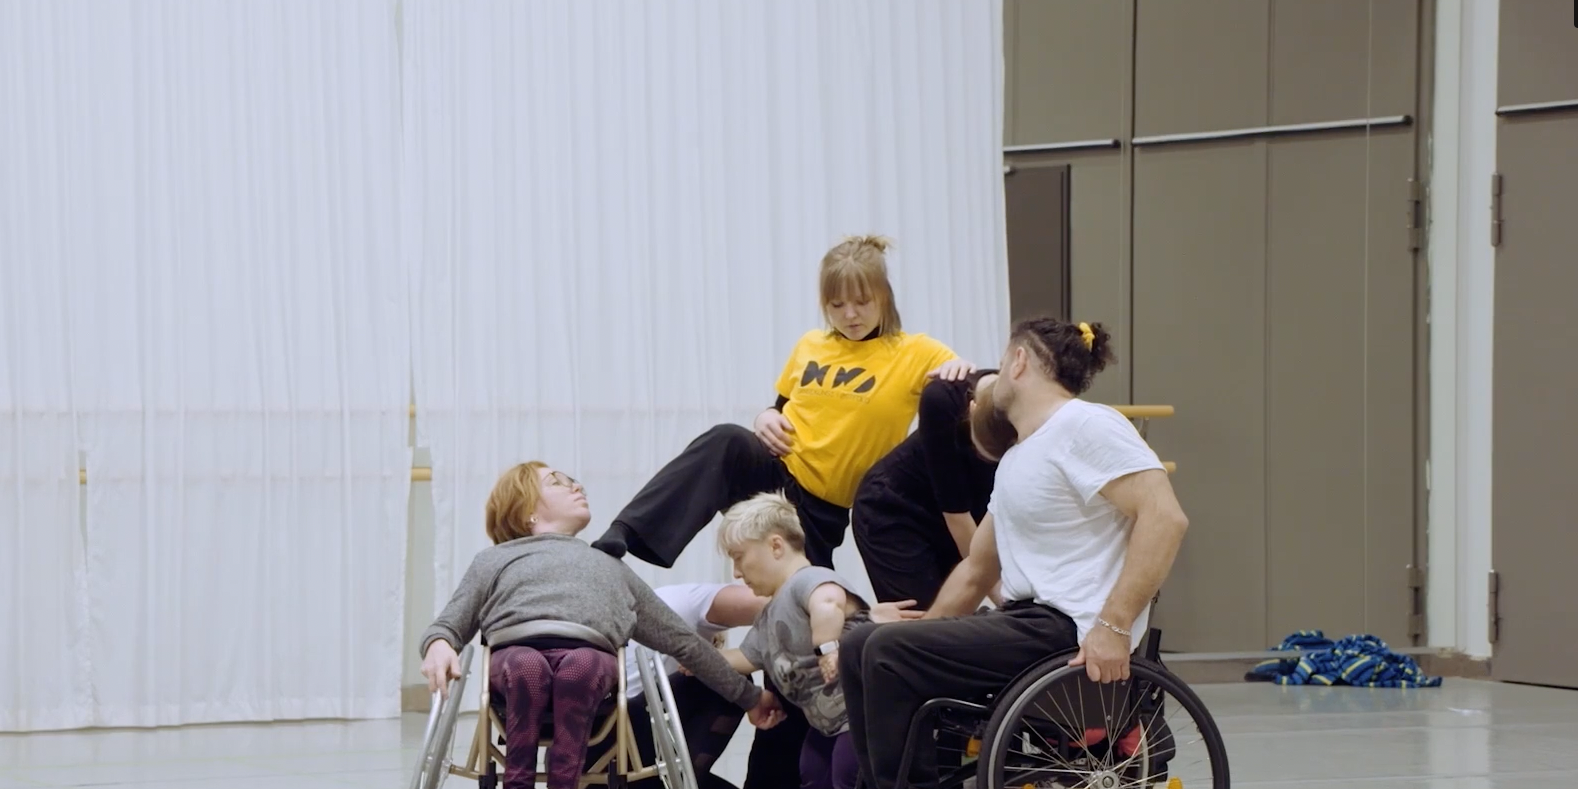 The image depicts five dancers in a dance studio standing close together. Three of them are standing up, two are sitting in wheelchairs. They all look in different directions.